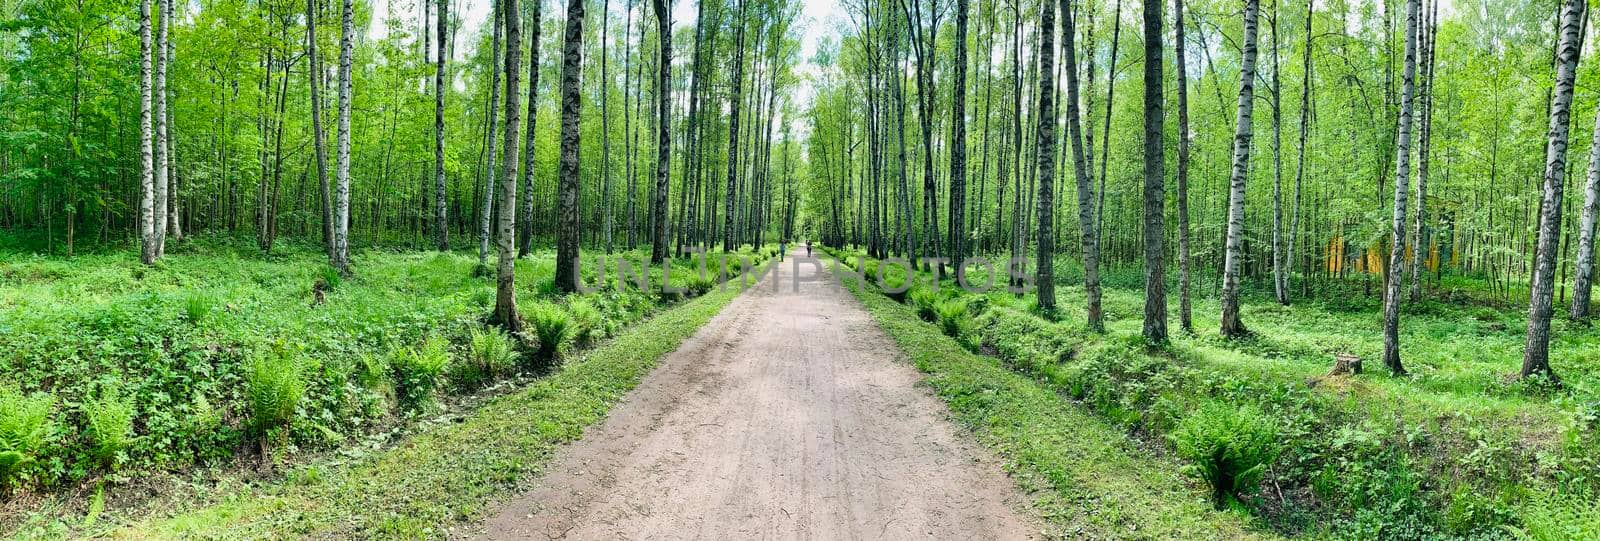 Panoramic image of the straight path in the forest among birch trunks in sunny weather, sun rays break through the foliage, nobody. High quality photo